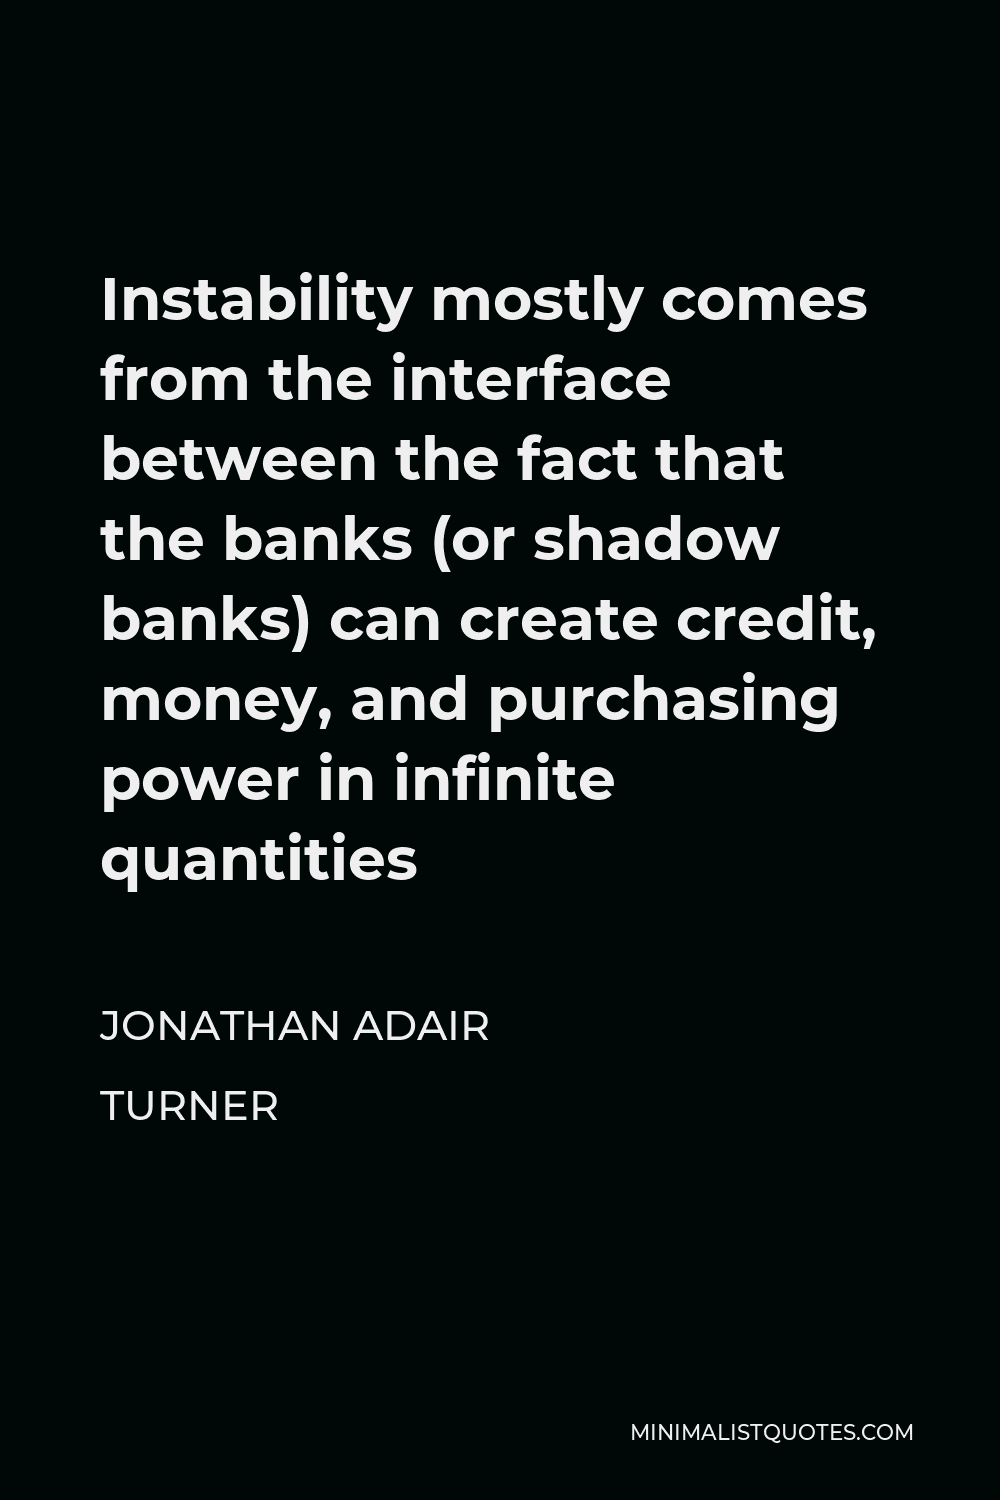 Jonathan Adair Turner Quote - Instability mostly comes from the interface between the fact that the banks (or shadow banks) can create credit, money, and purchasing power in infinite quantities